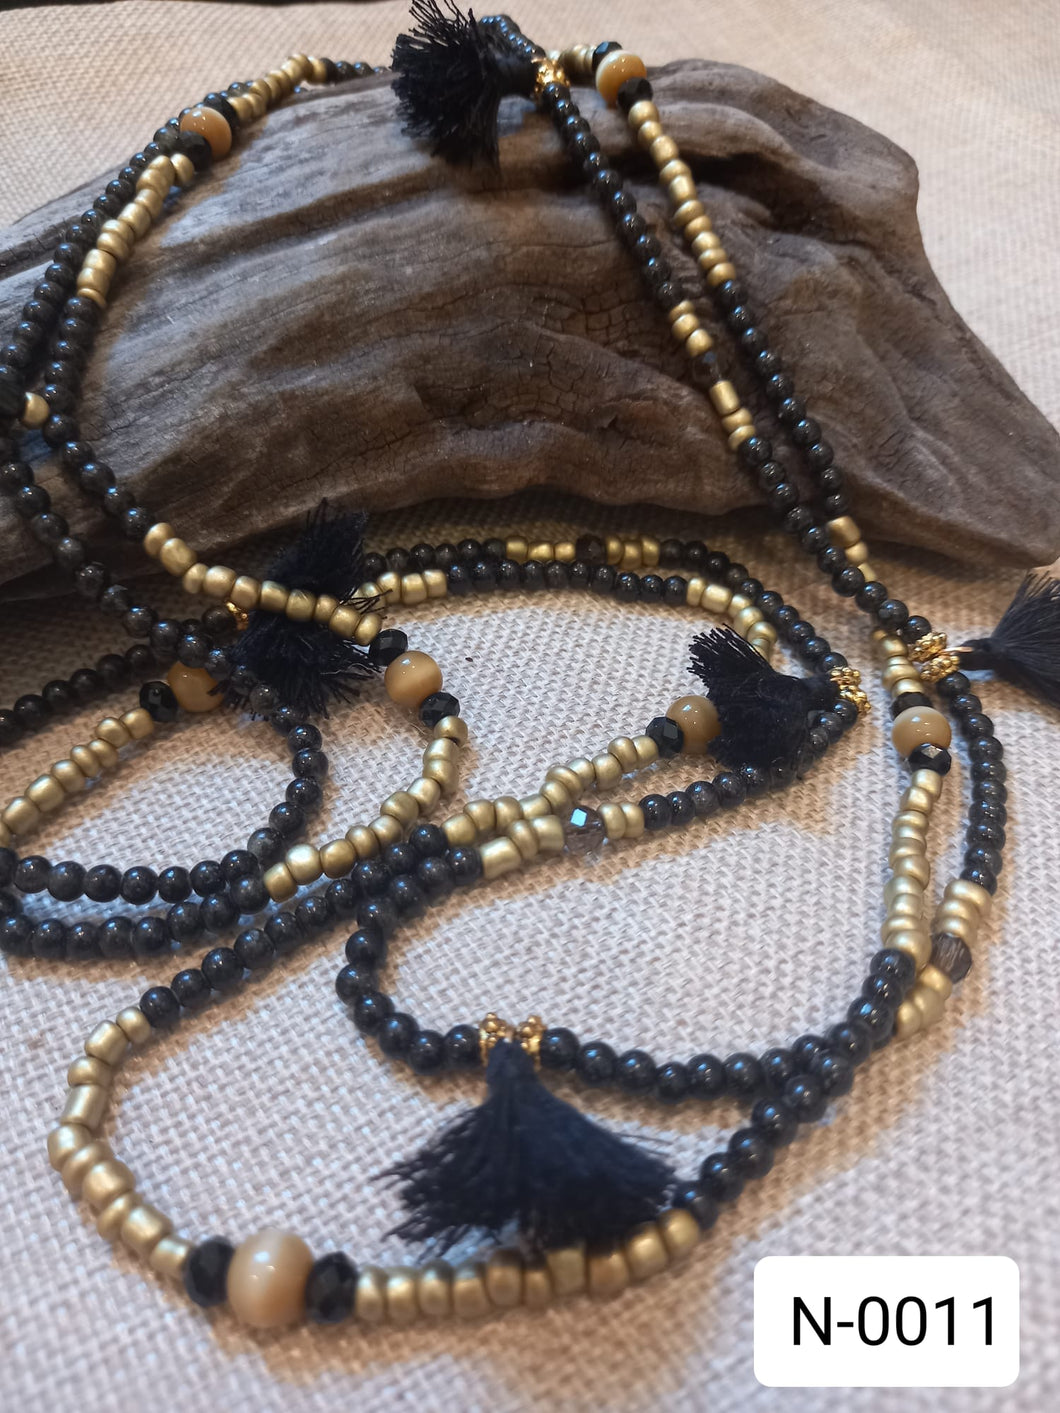 Black and Gold Seed Bead Necklace with Tassles